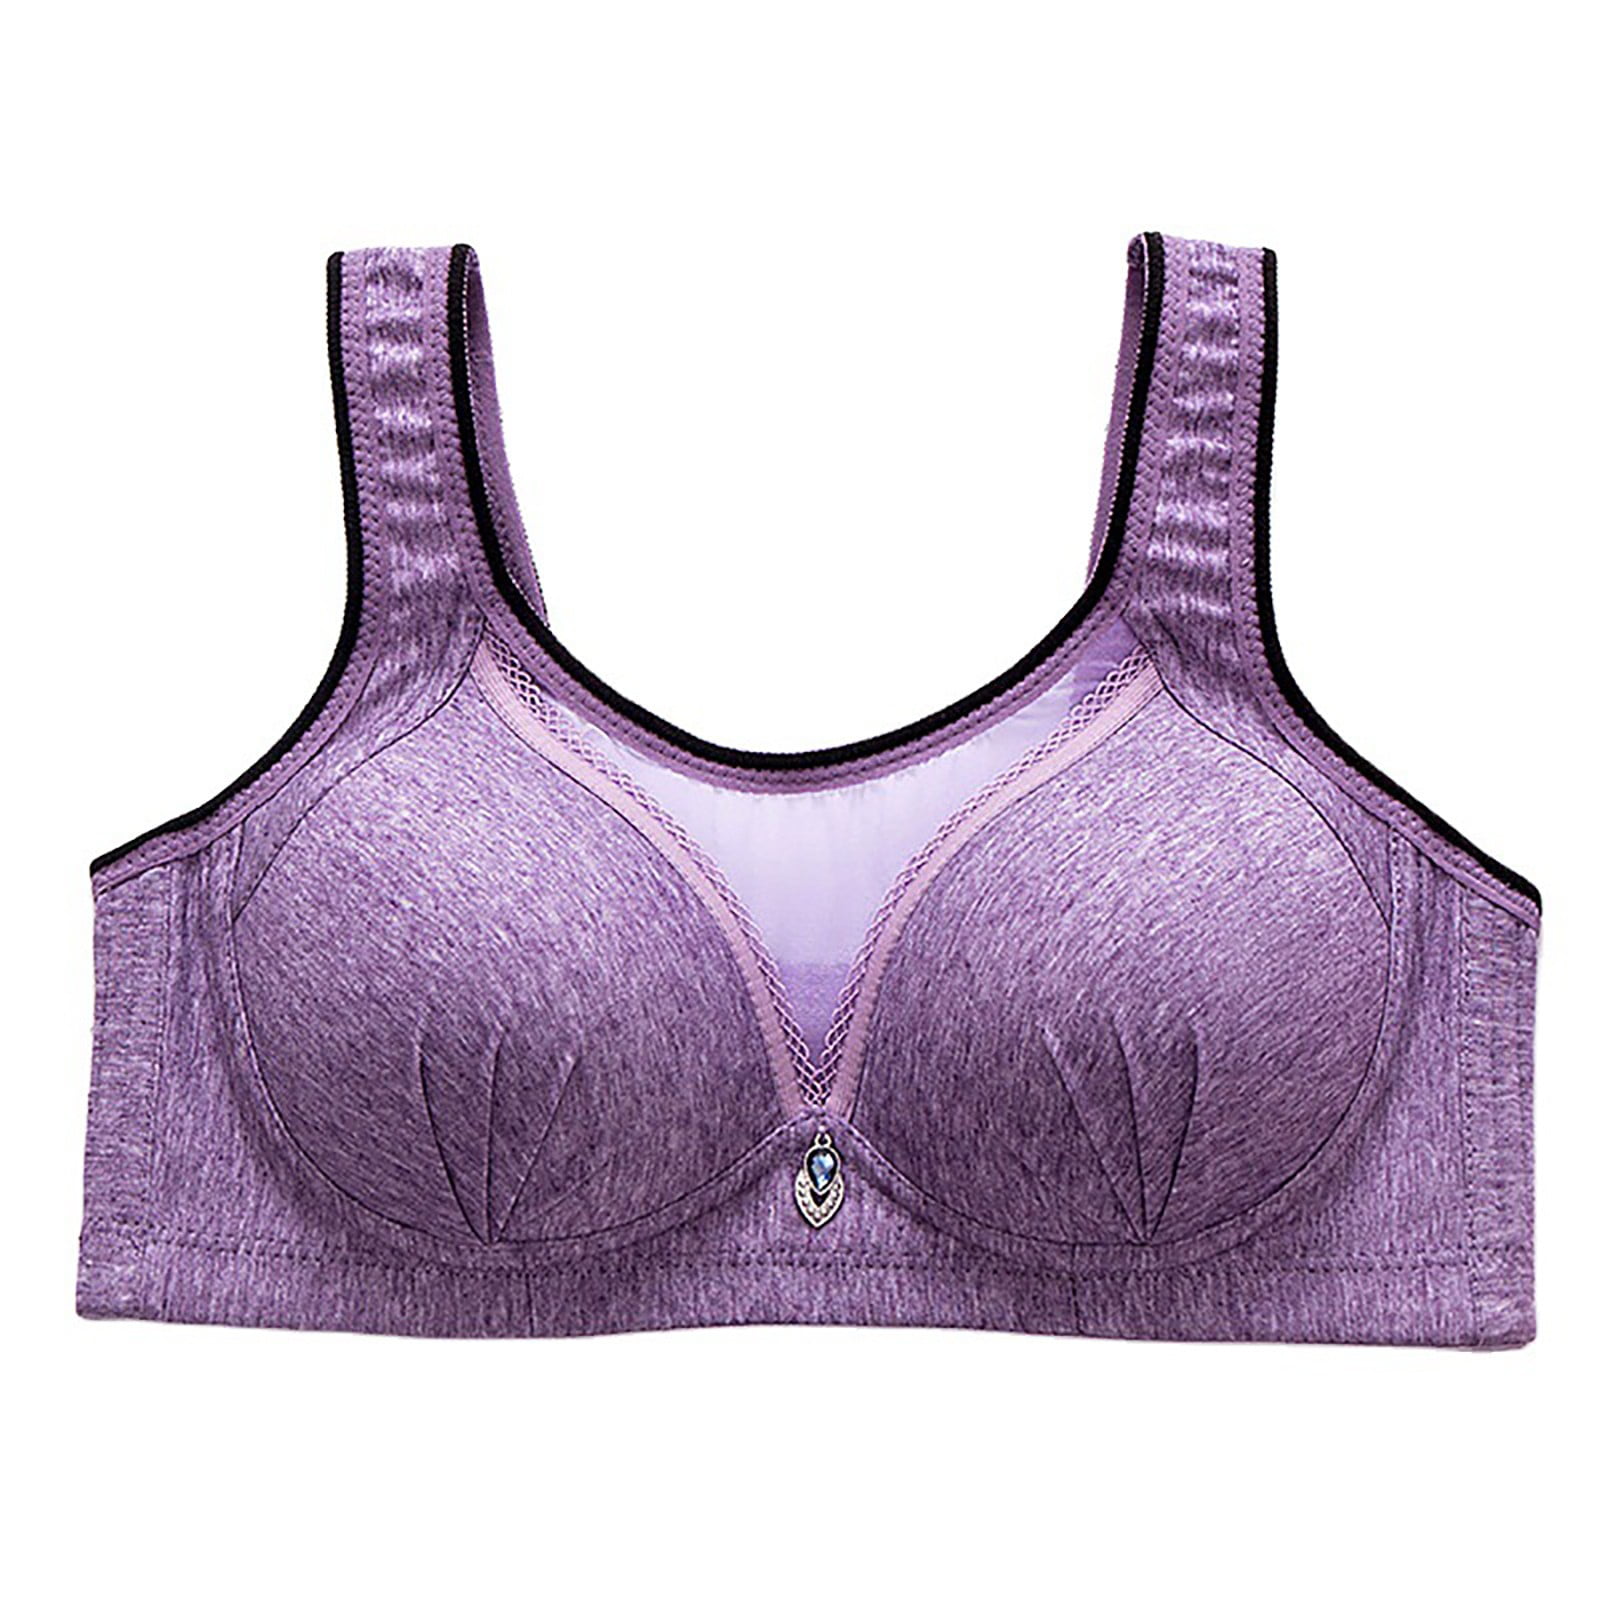 JBIVWW Women Bra Full Cup Sports Underwear Push Up Wireless Adjustable Lace  Breast Cover Cup Plus Size Lace Sports Bras (Color : Purple style D, Cup